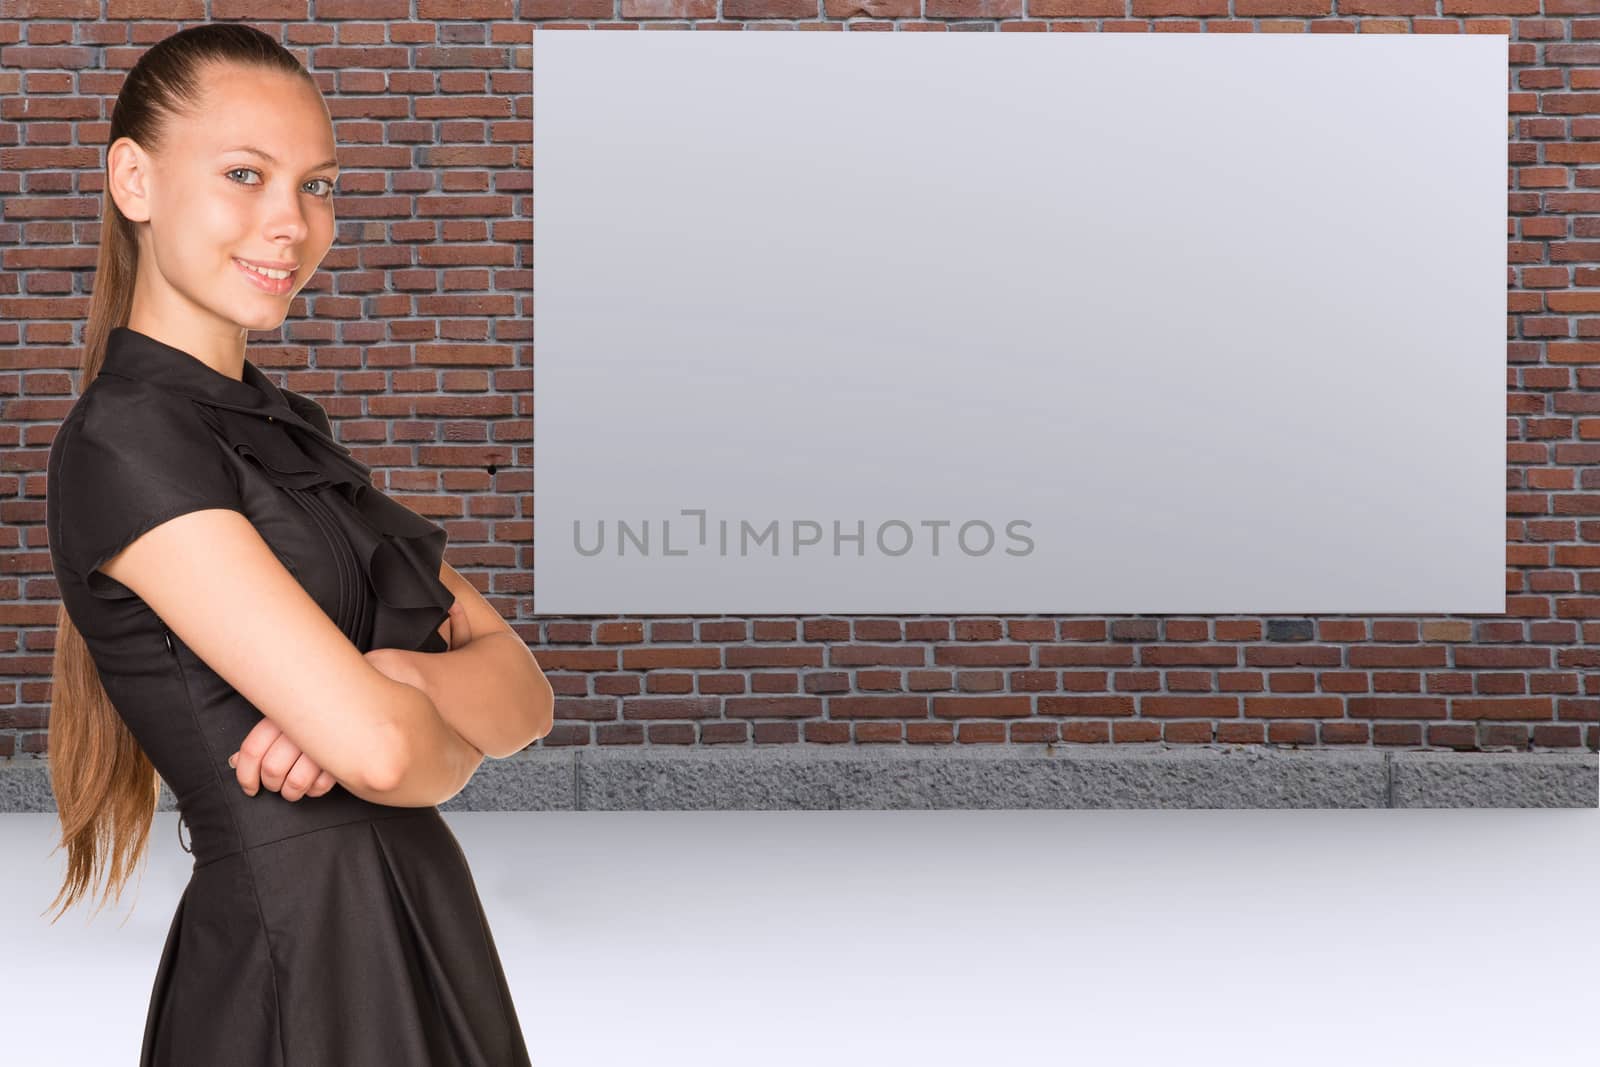 Beautiful businesswoman in dress smiling and looking at camera. Brick wall with empty white placard as backdrop. Business concept